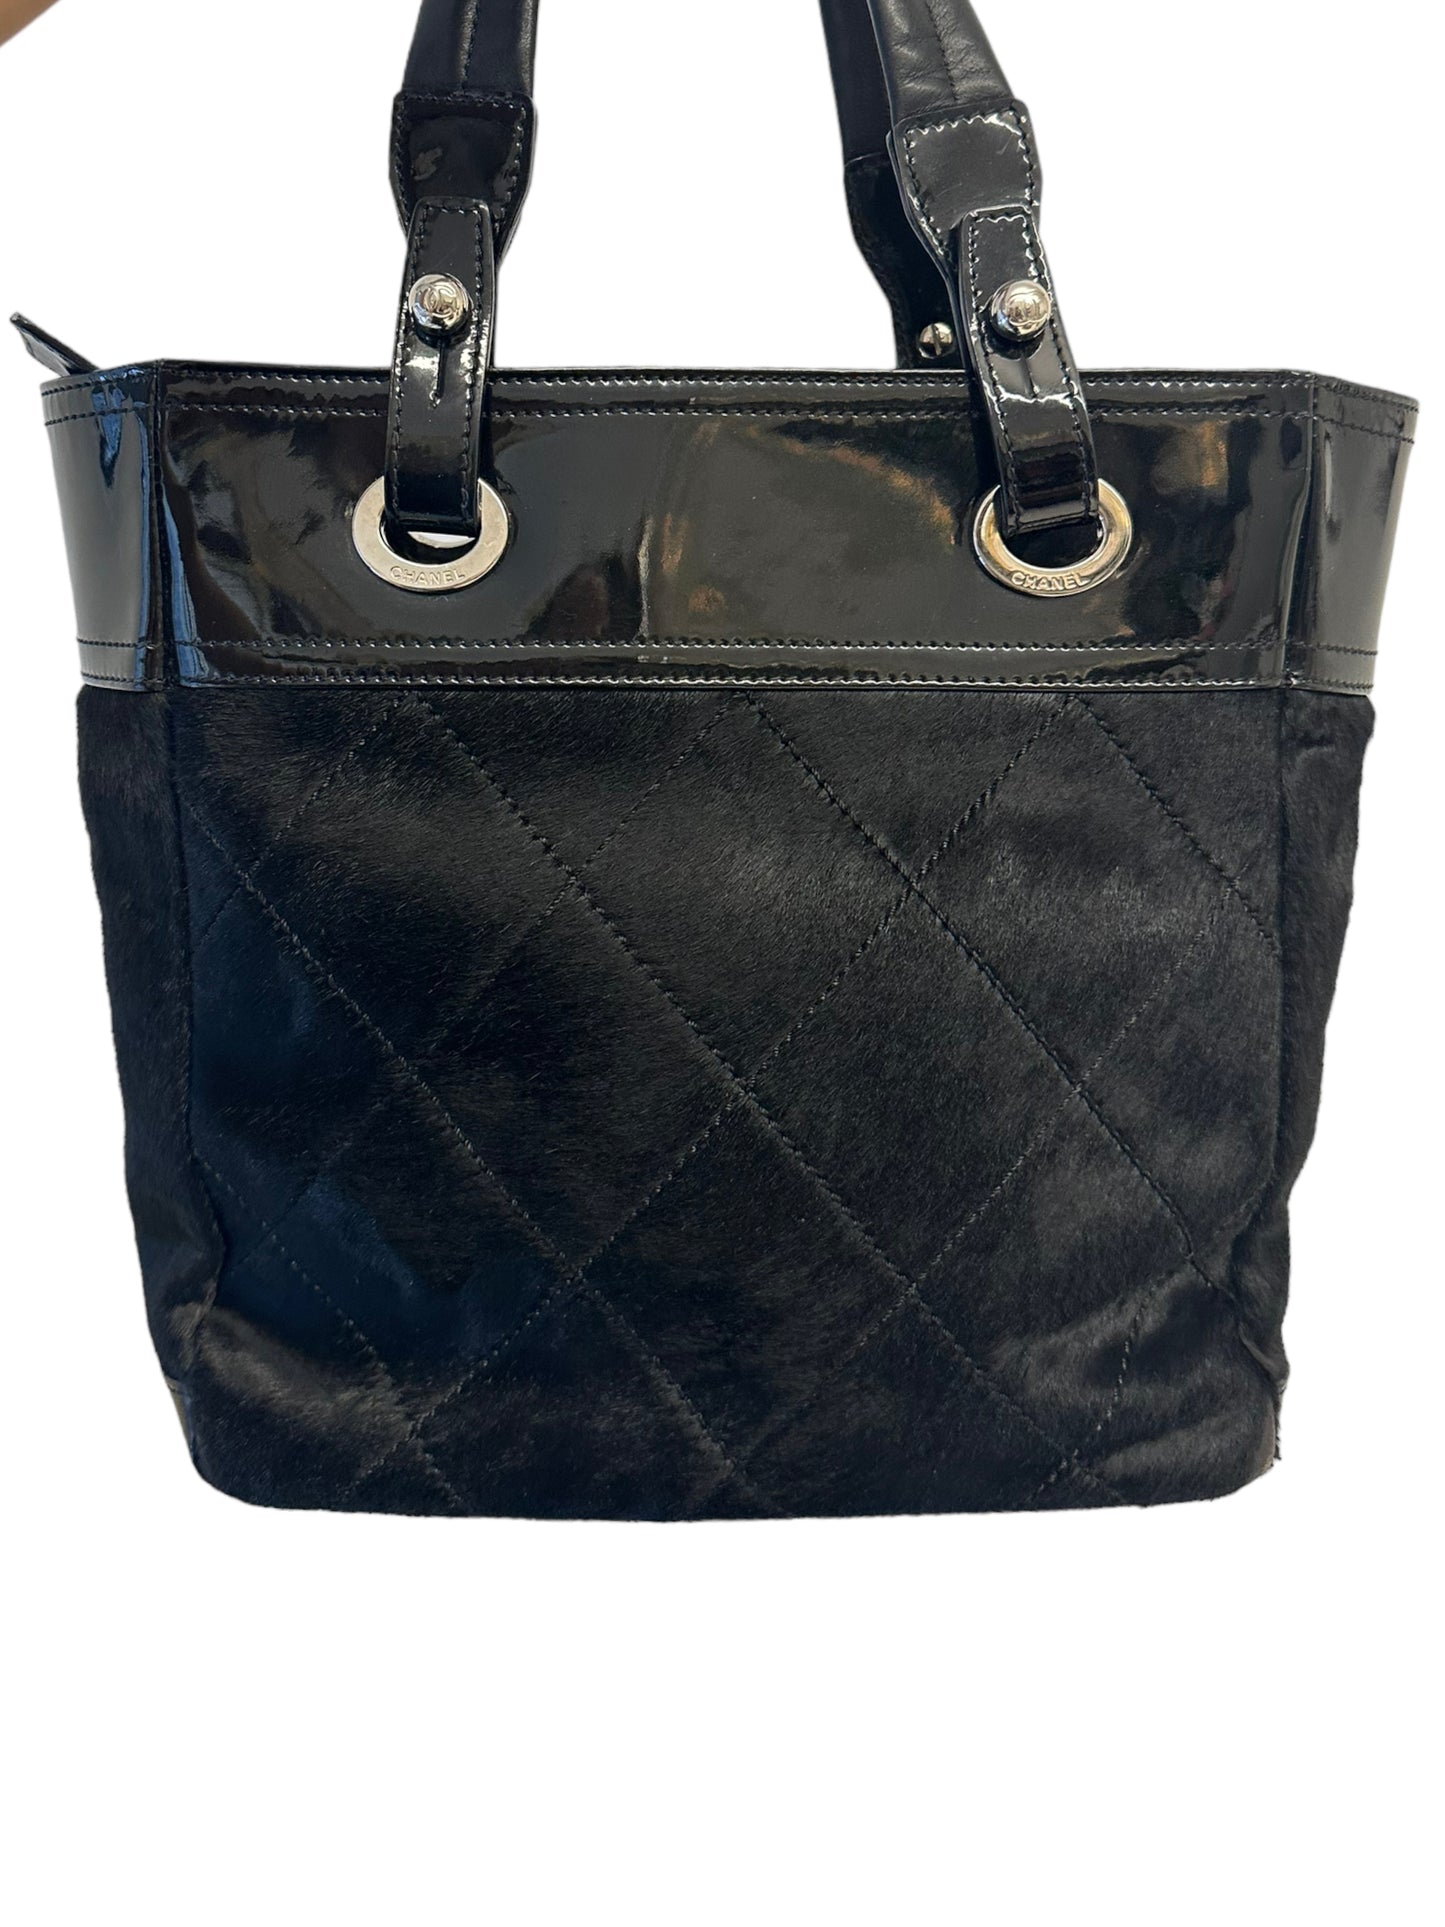 CHANEL - Black Patent Pony Hair Small Tote